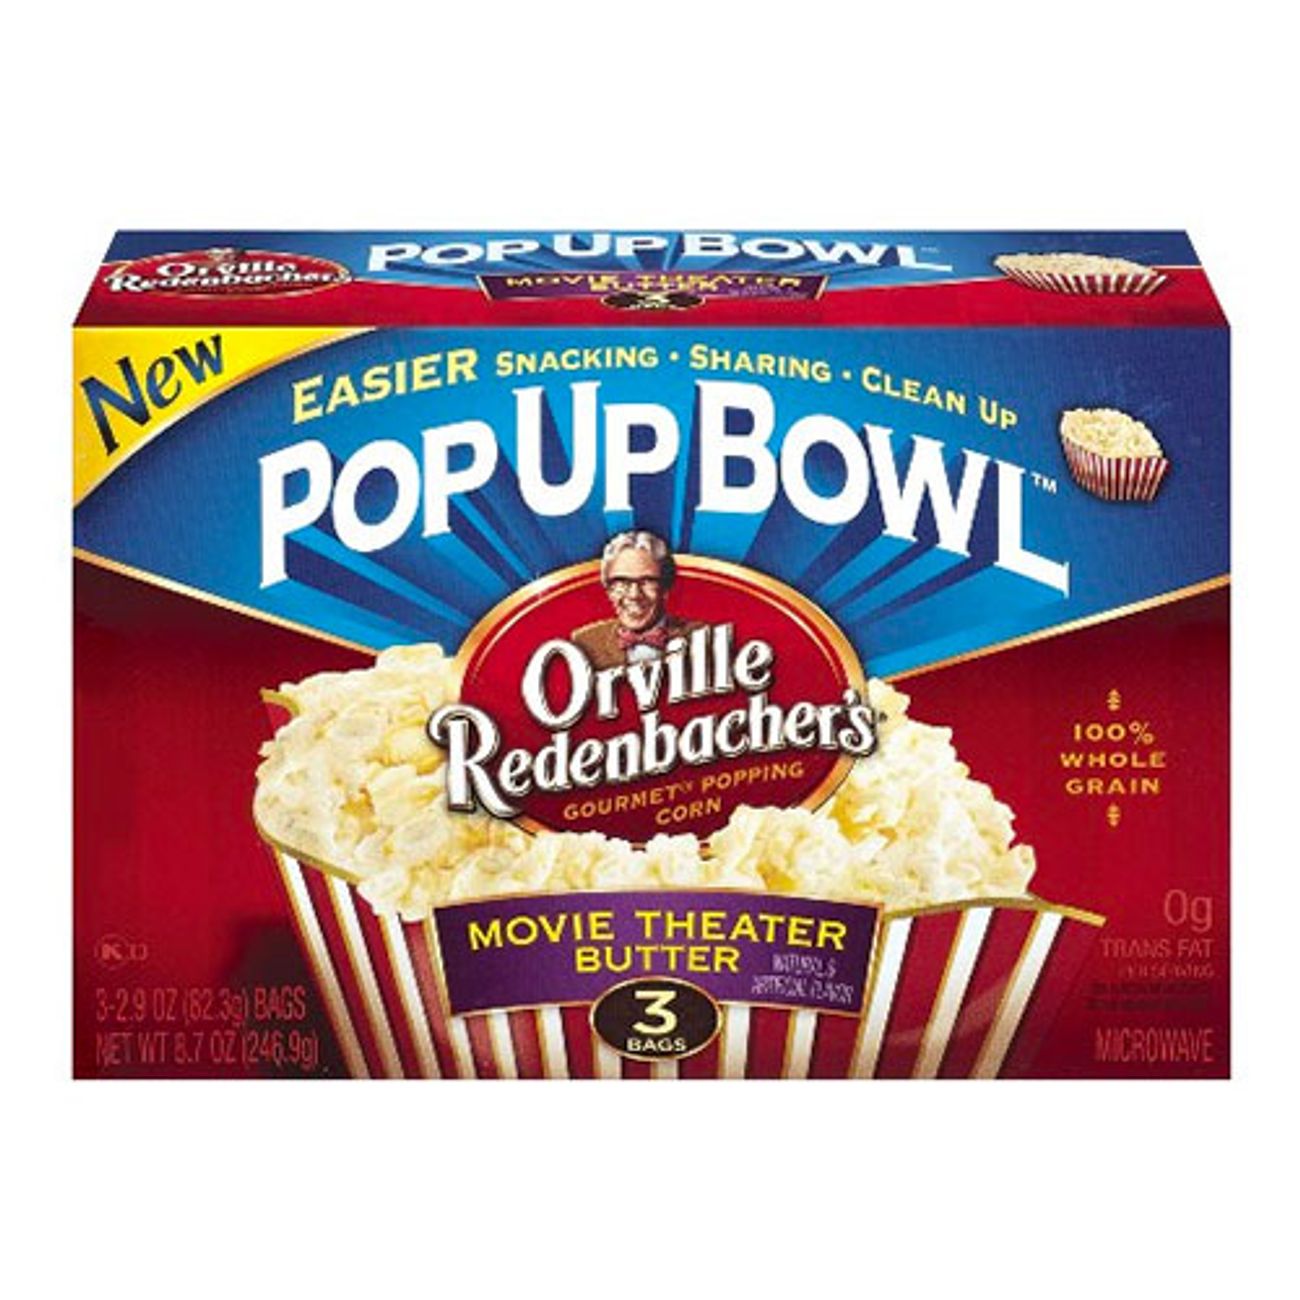 orville-redenbachers-movie-theater-butter-micropopcorn-1